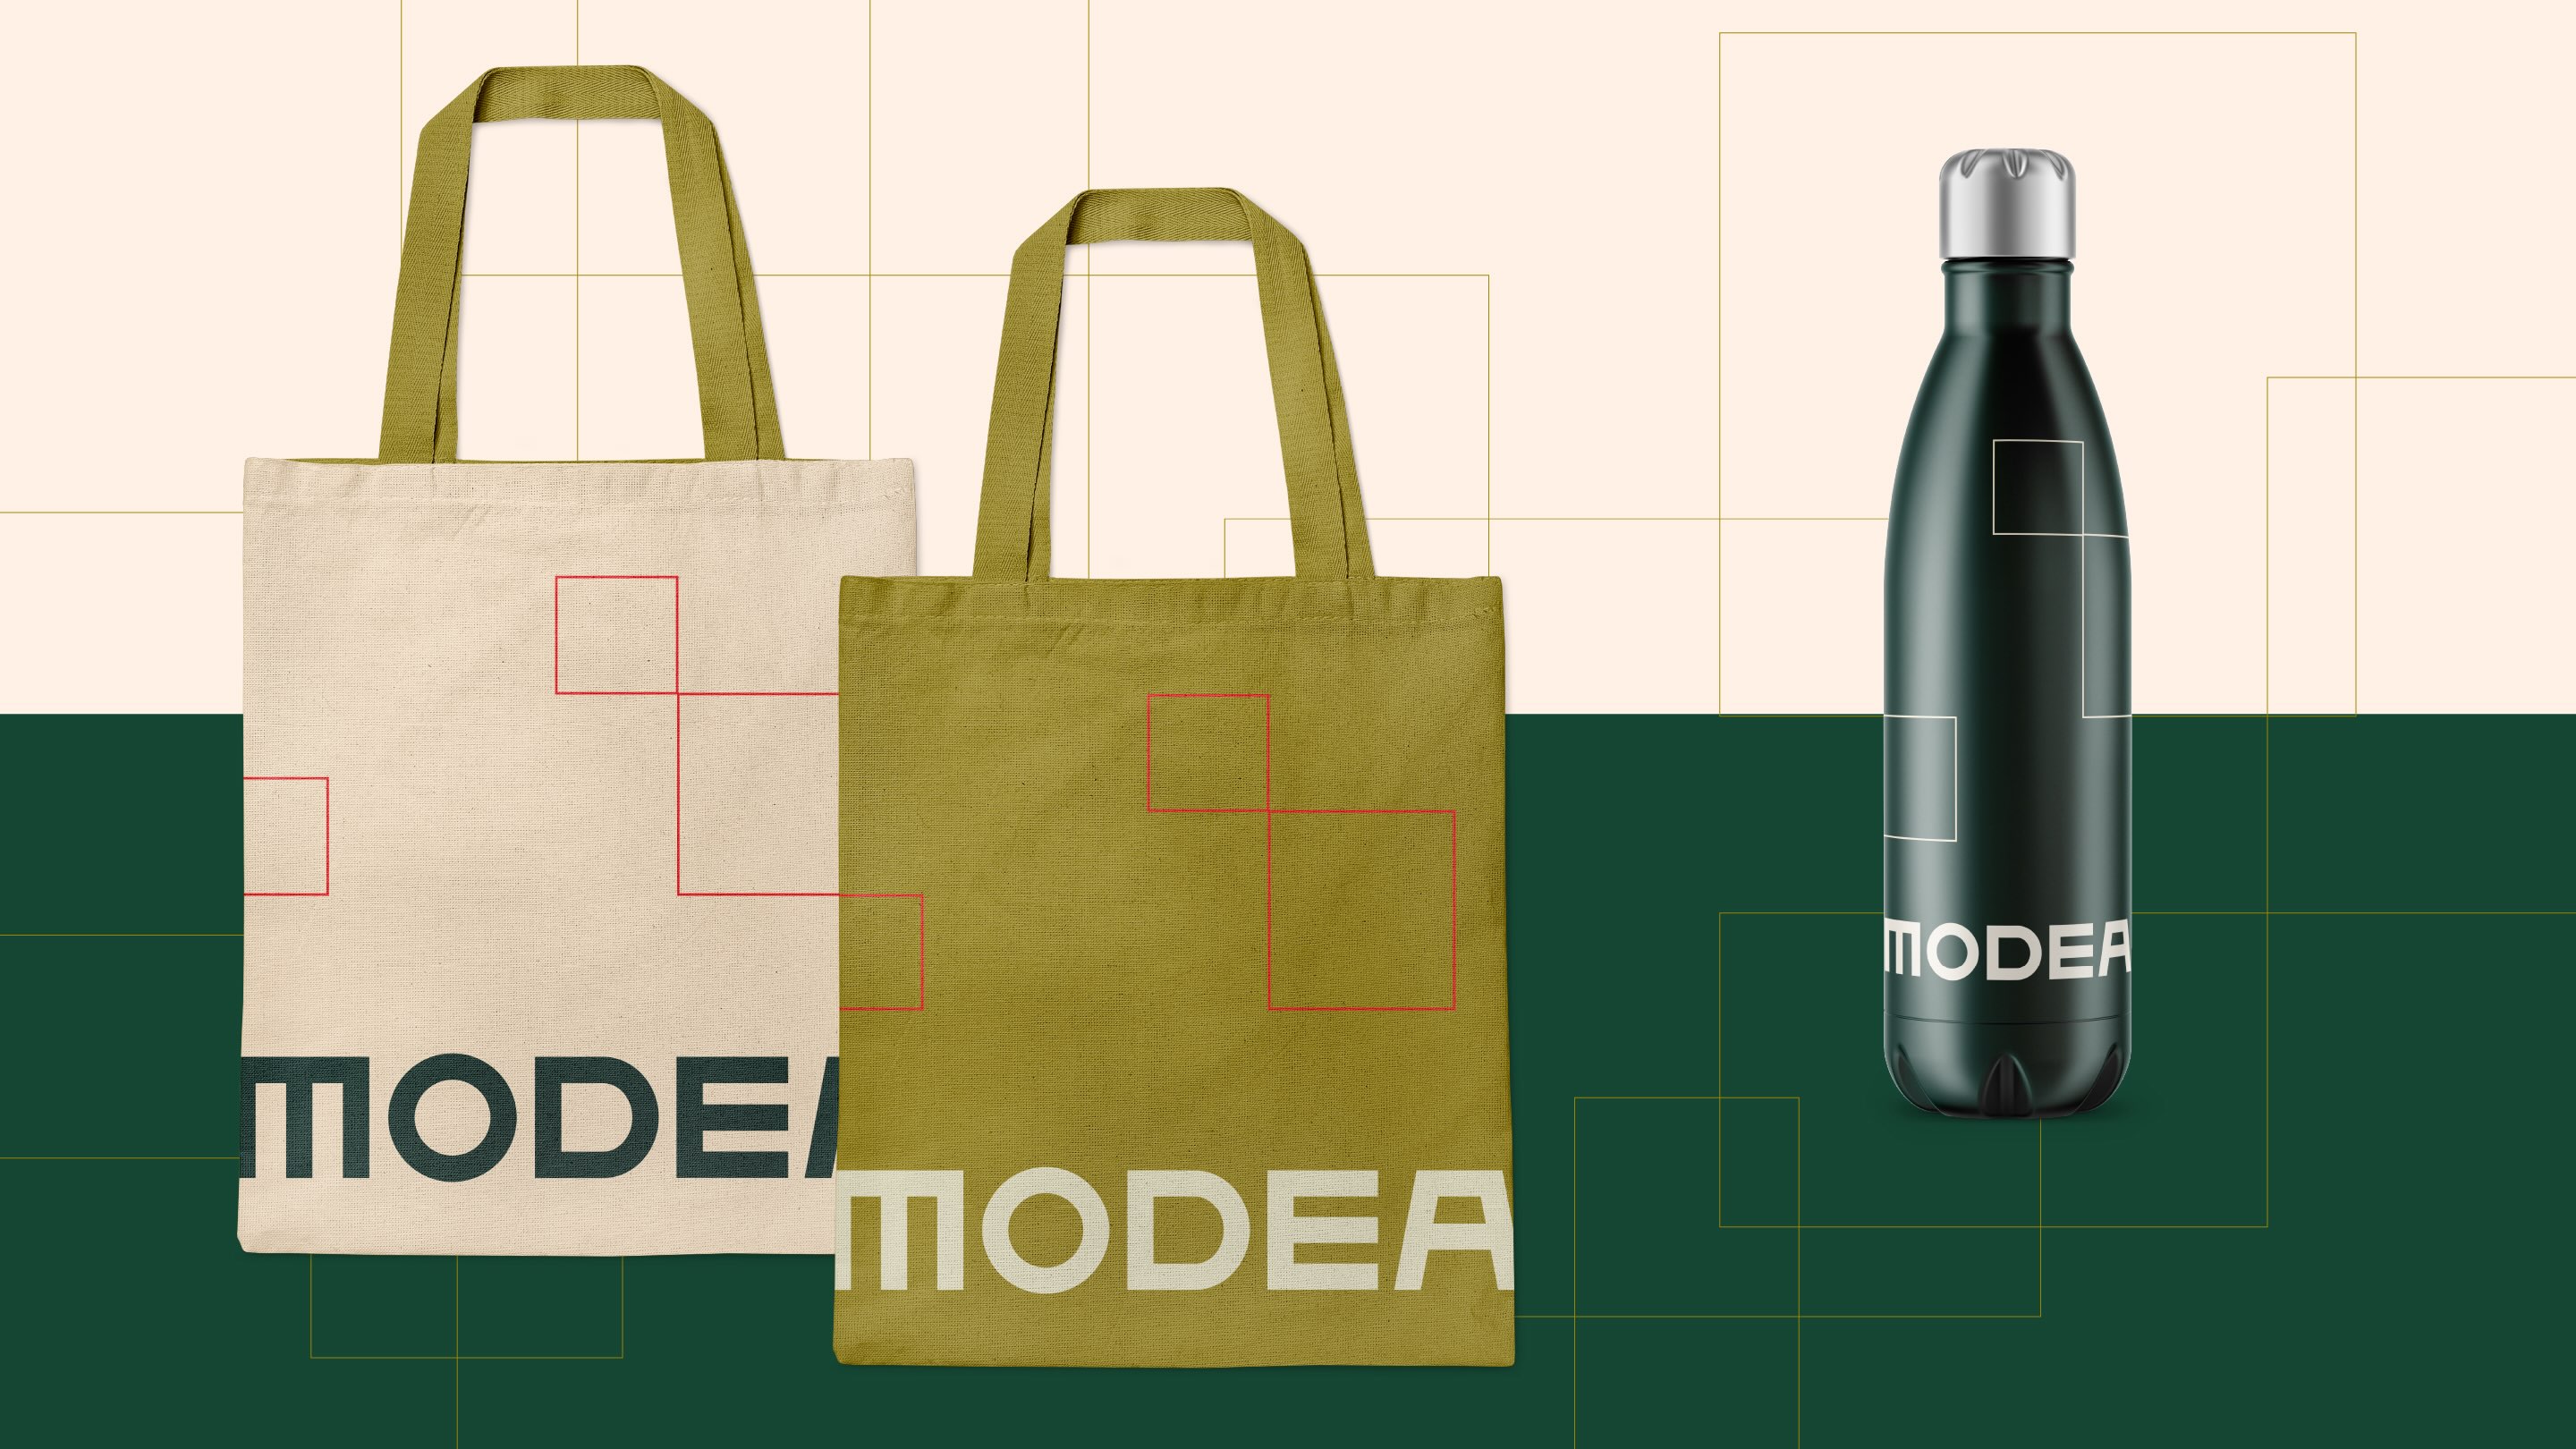 Custom branded Modea merch, including tote bag and water bottle.